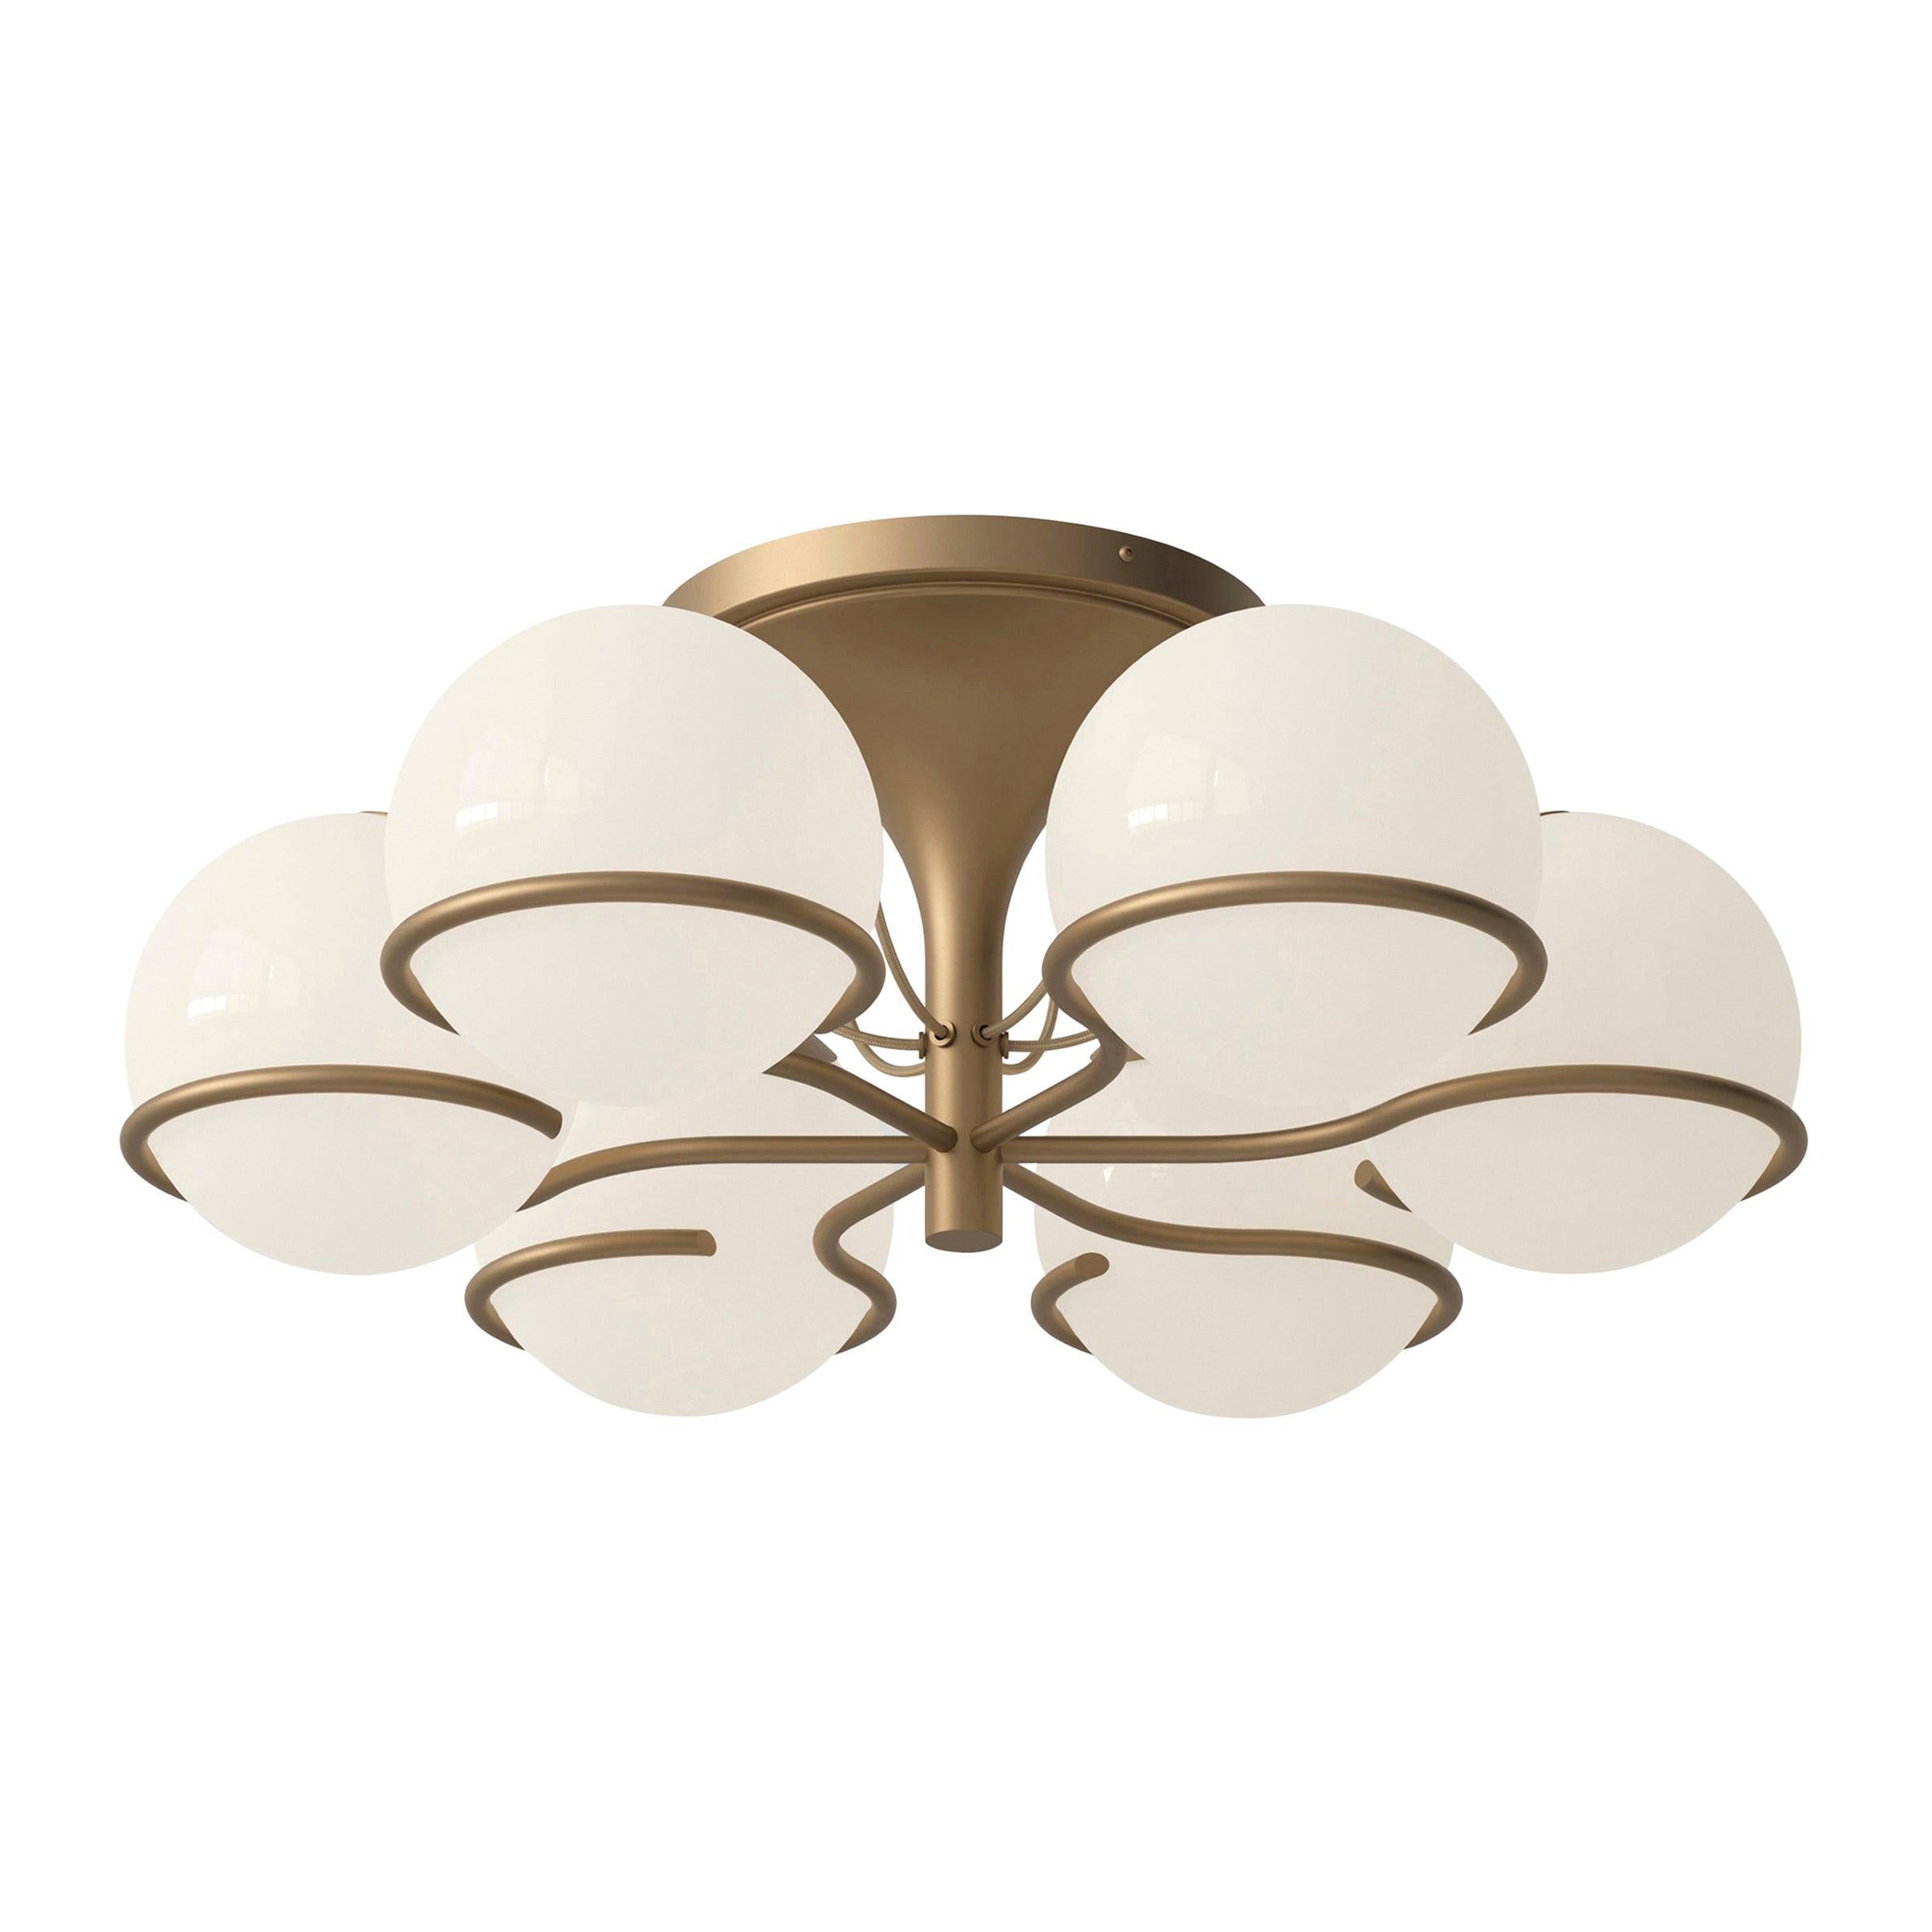 Product Image Model 2042/9 Ceiling